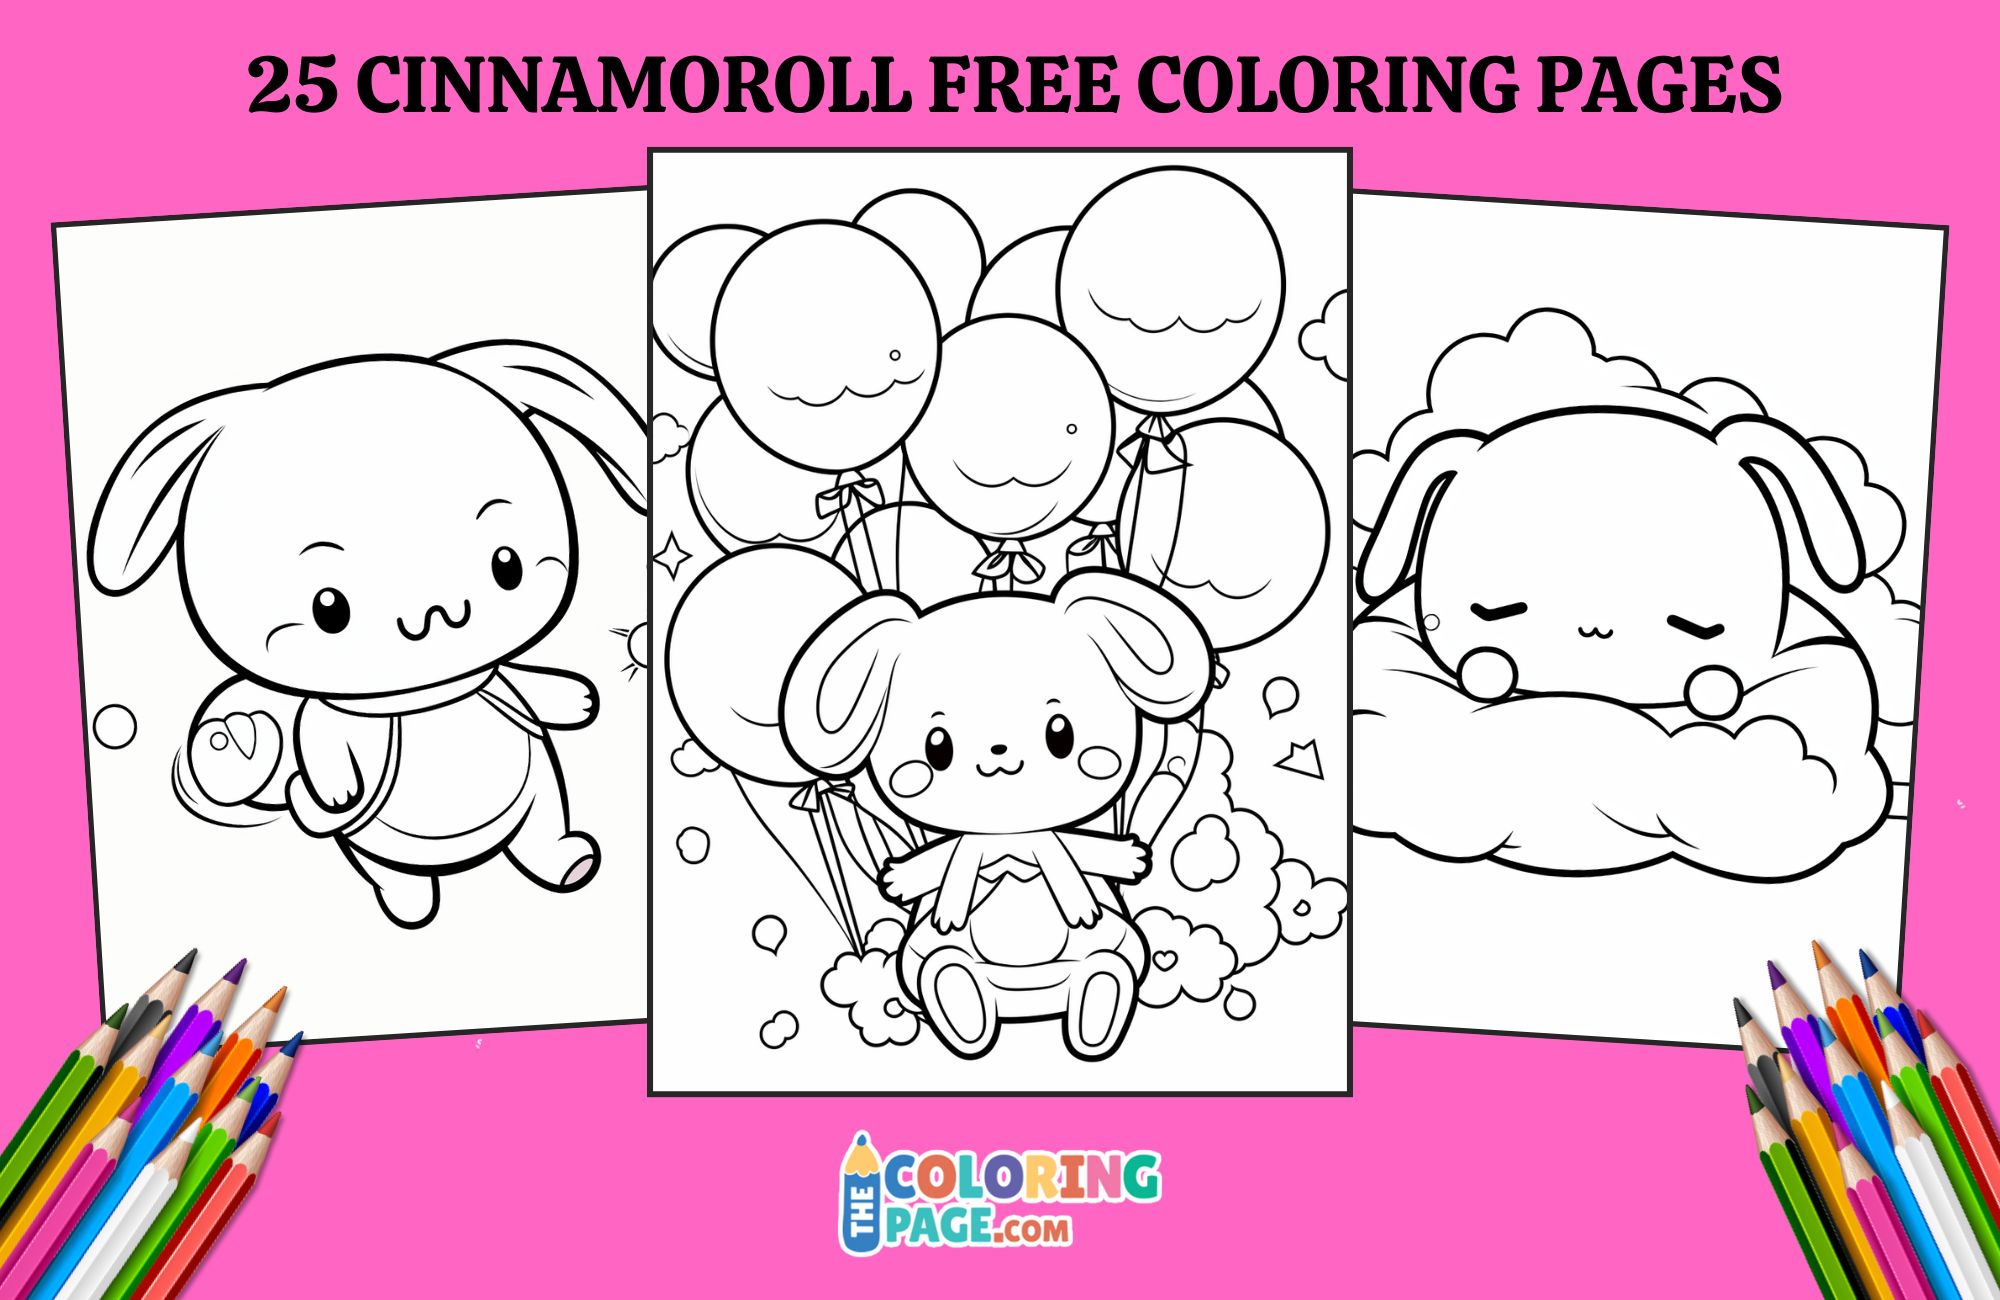 25 Cinnamoroll Coloring Pages for kids